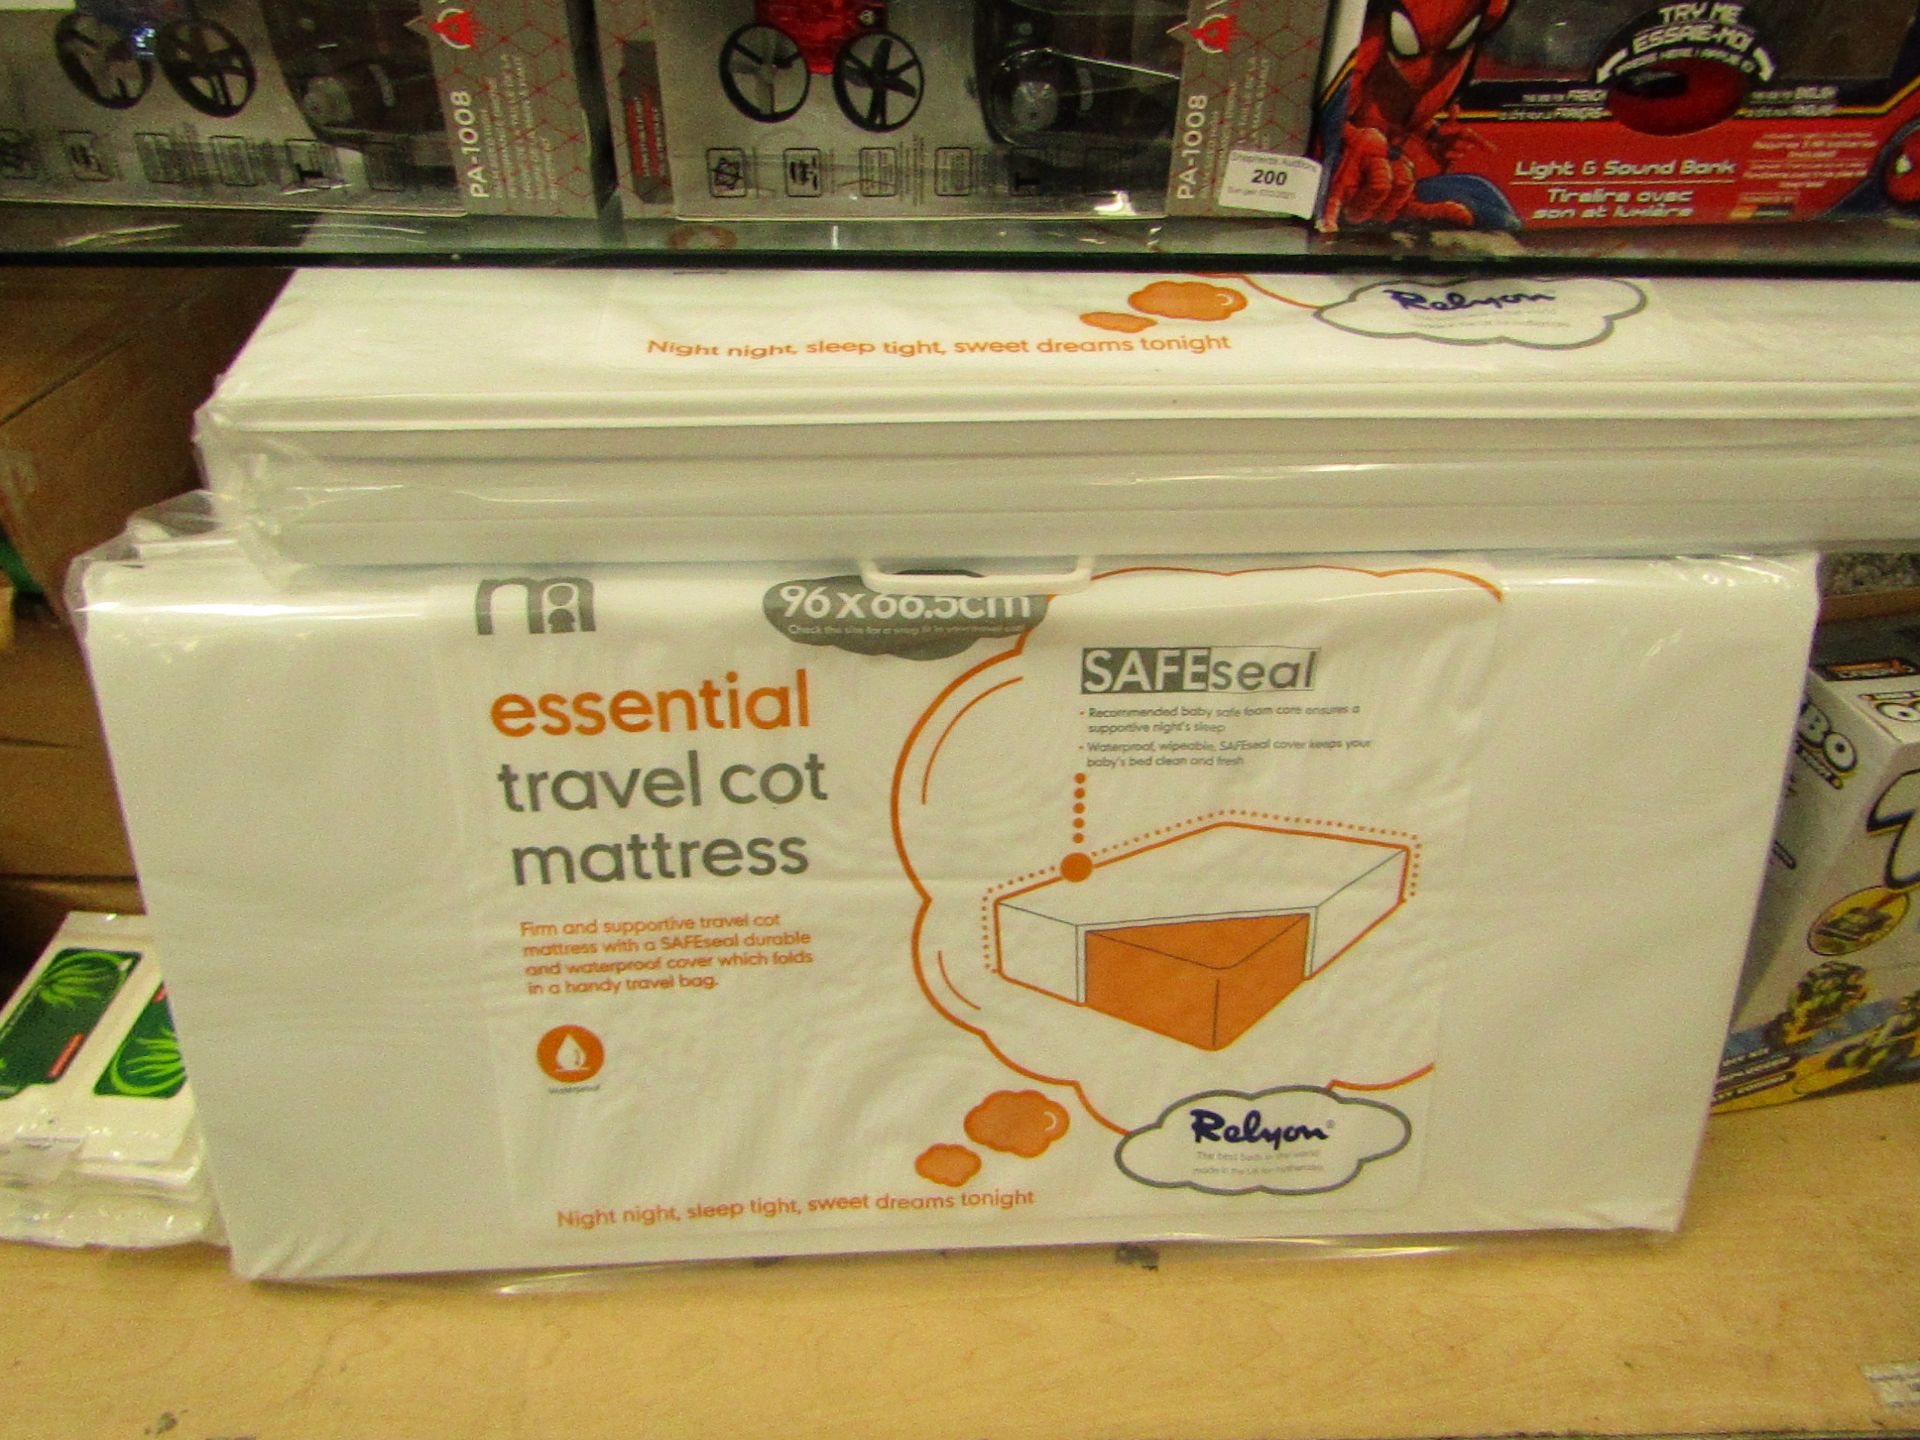 1 X Mothercare Essential Travel Cot Mattress 96 x 66.5cm new & packaged